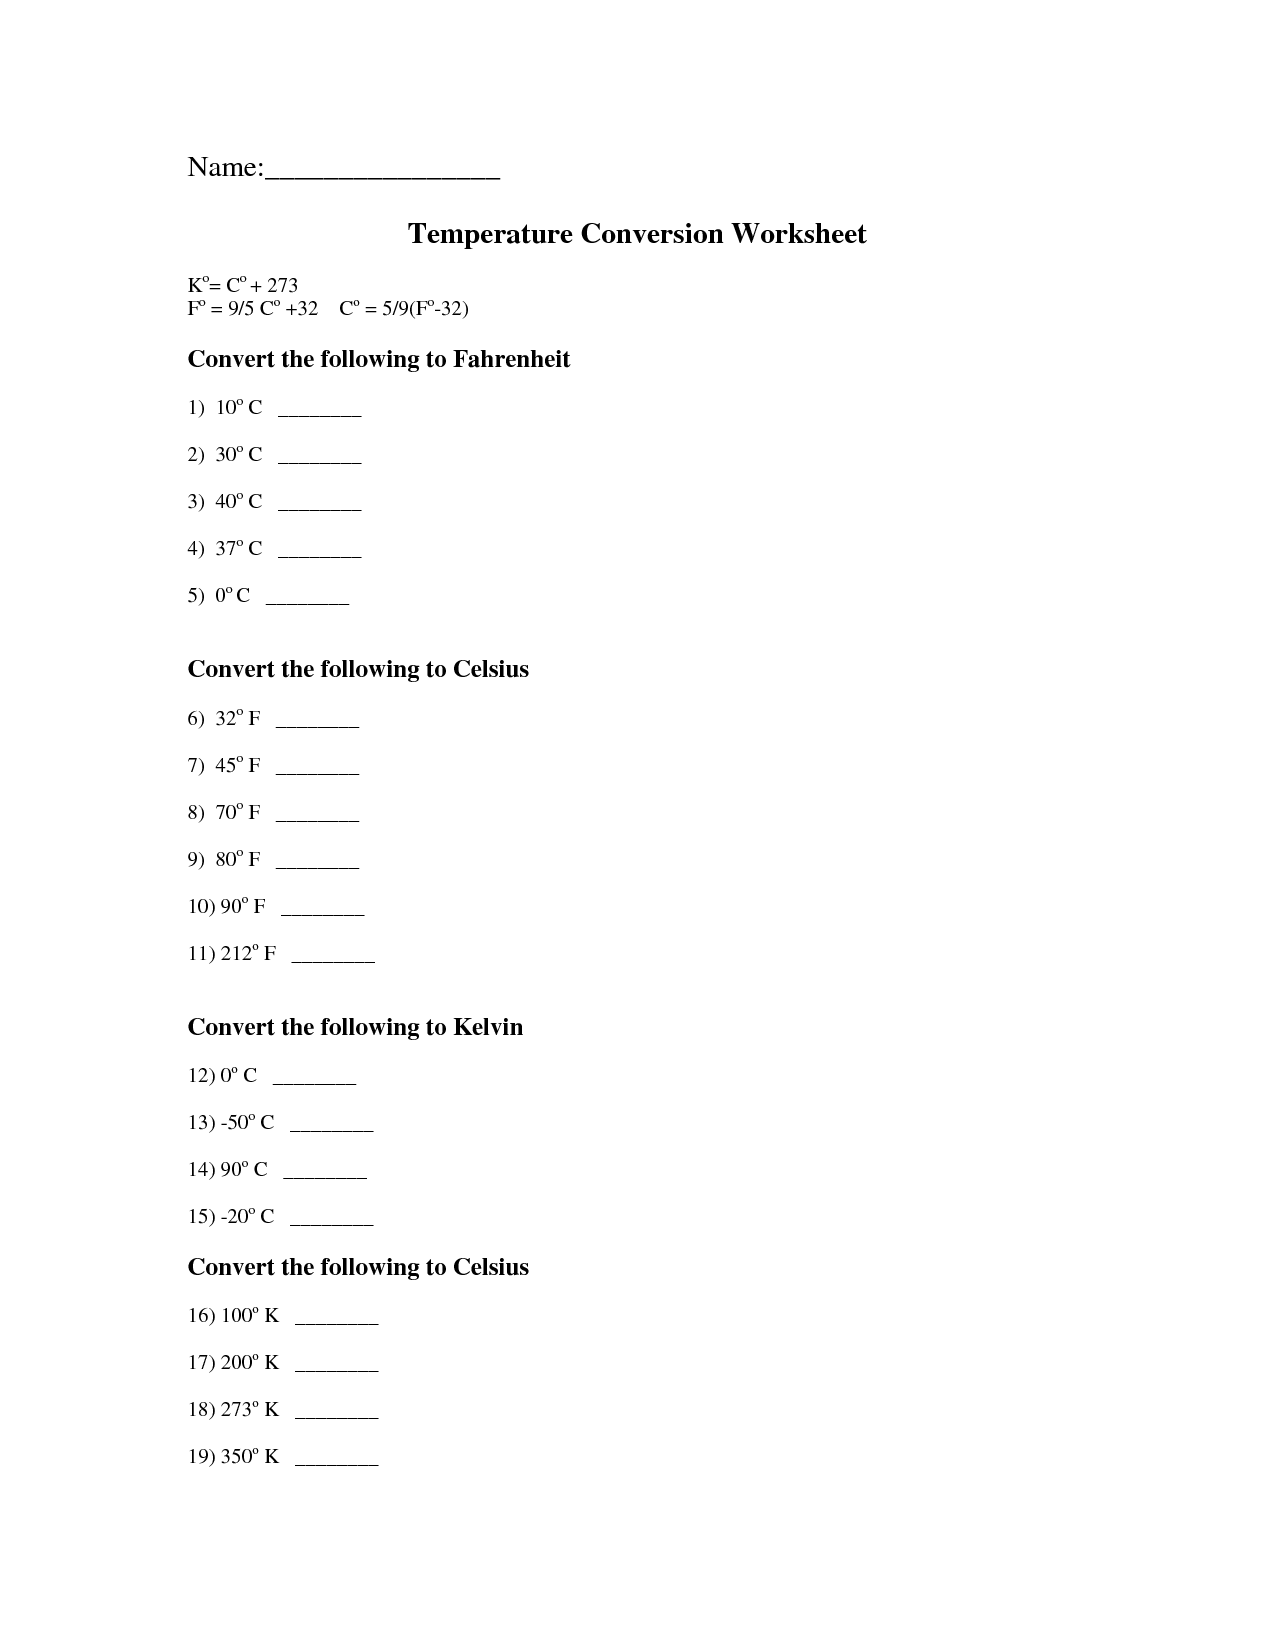 Temperature Conversion Worksheet With Answers